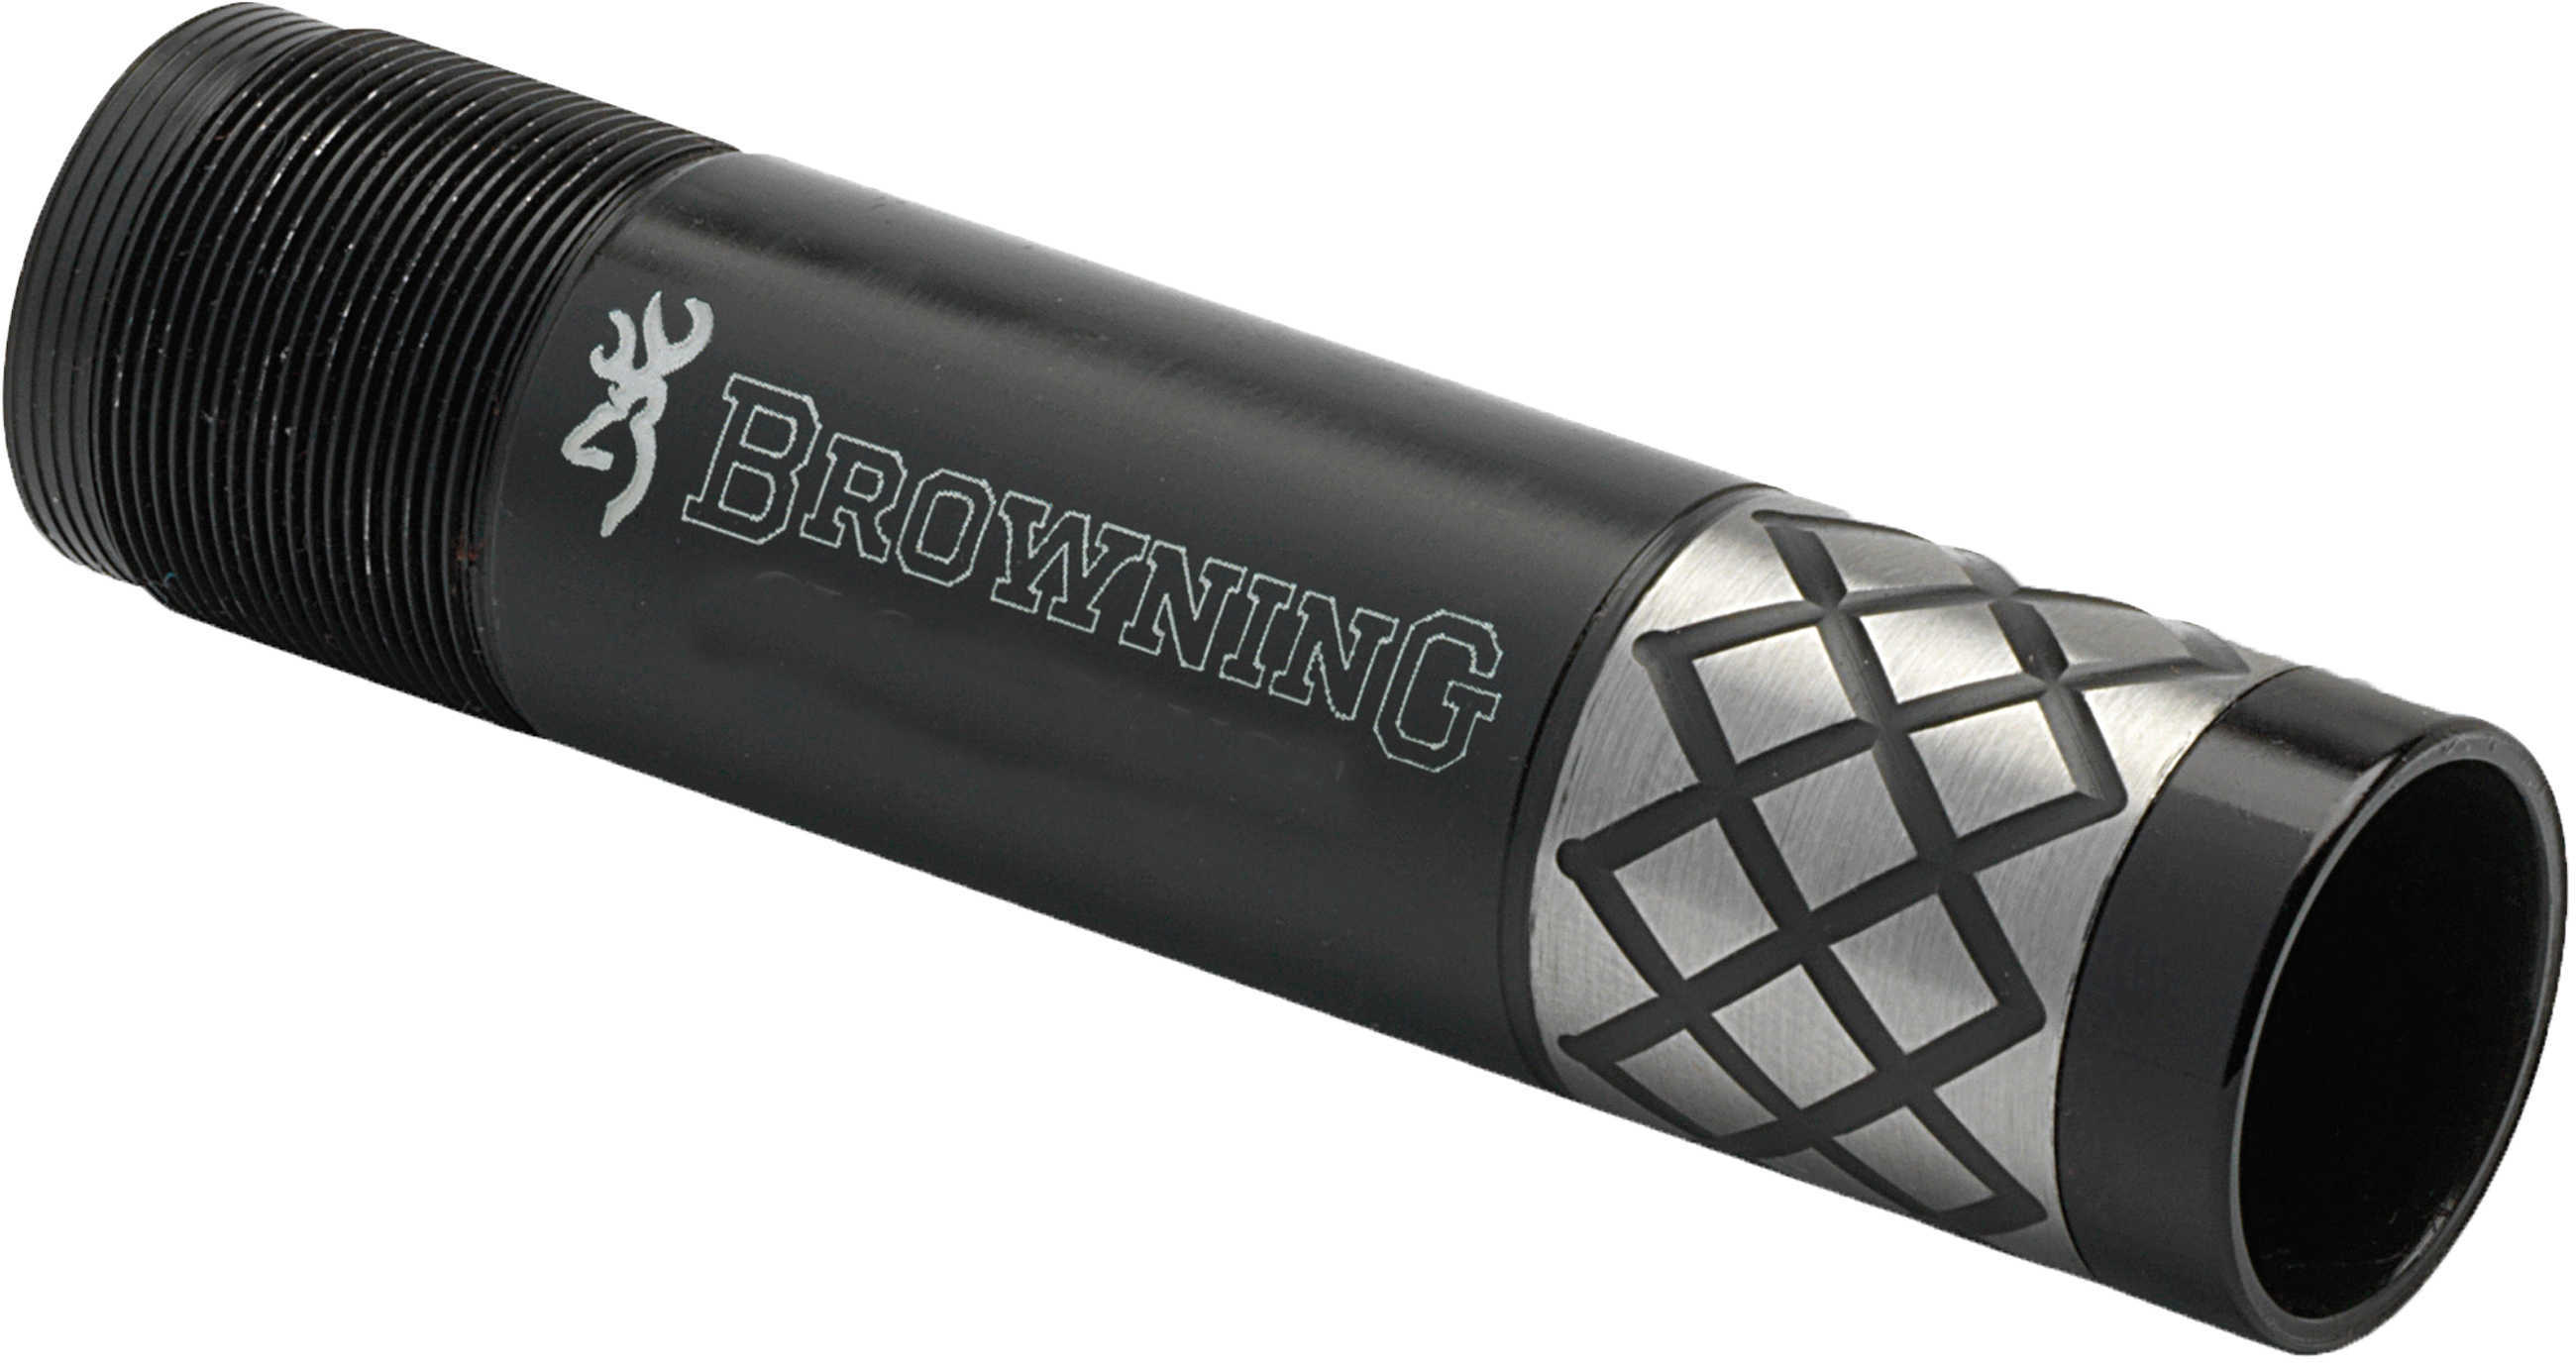 Browning Wicked Wing 12 Gauge Mid-Range Invector-Plus 17-4 SS Black Oxide Choke Tube Md: 1130316